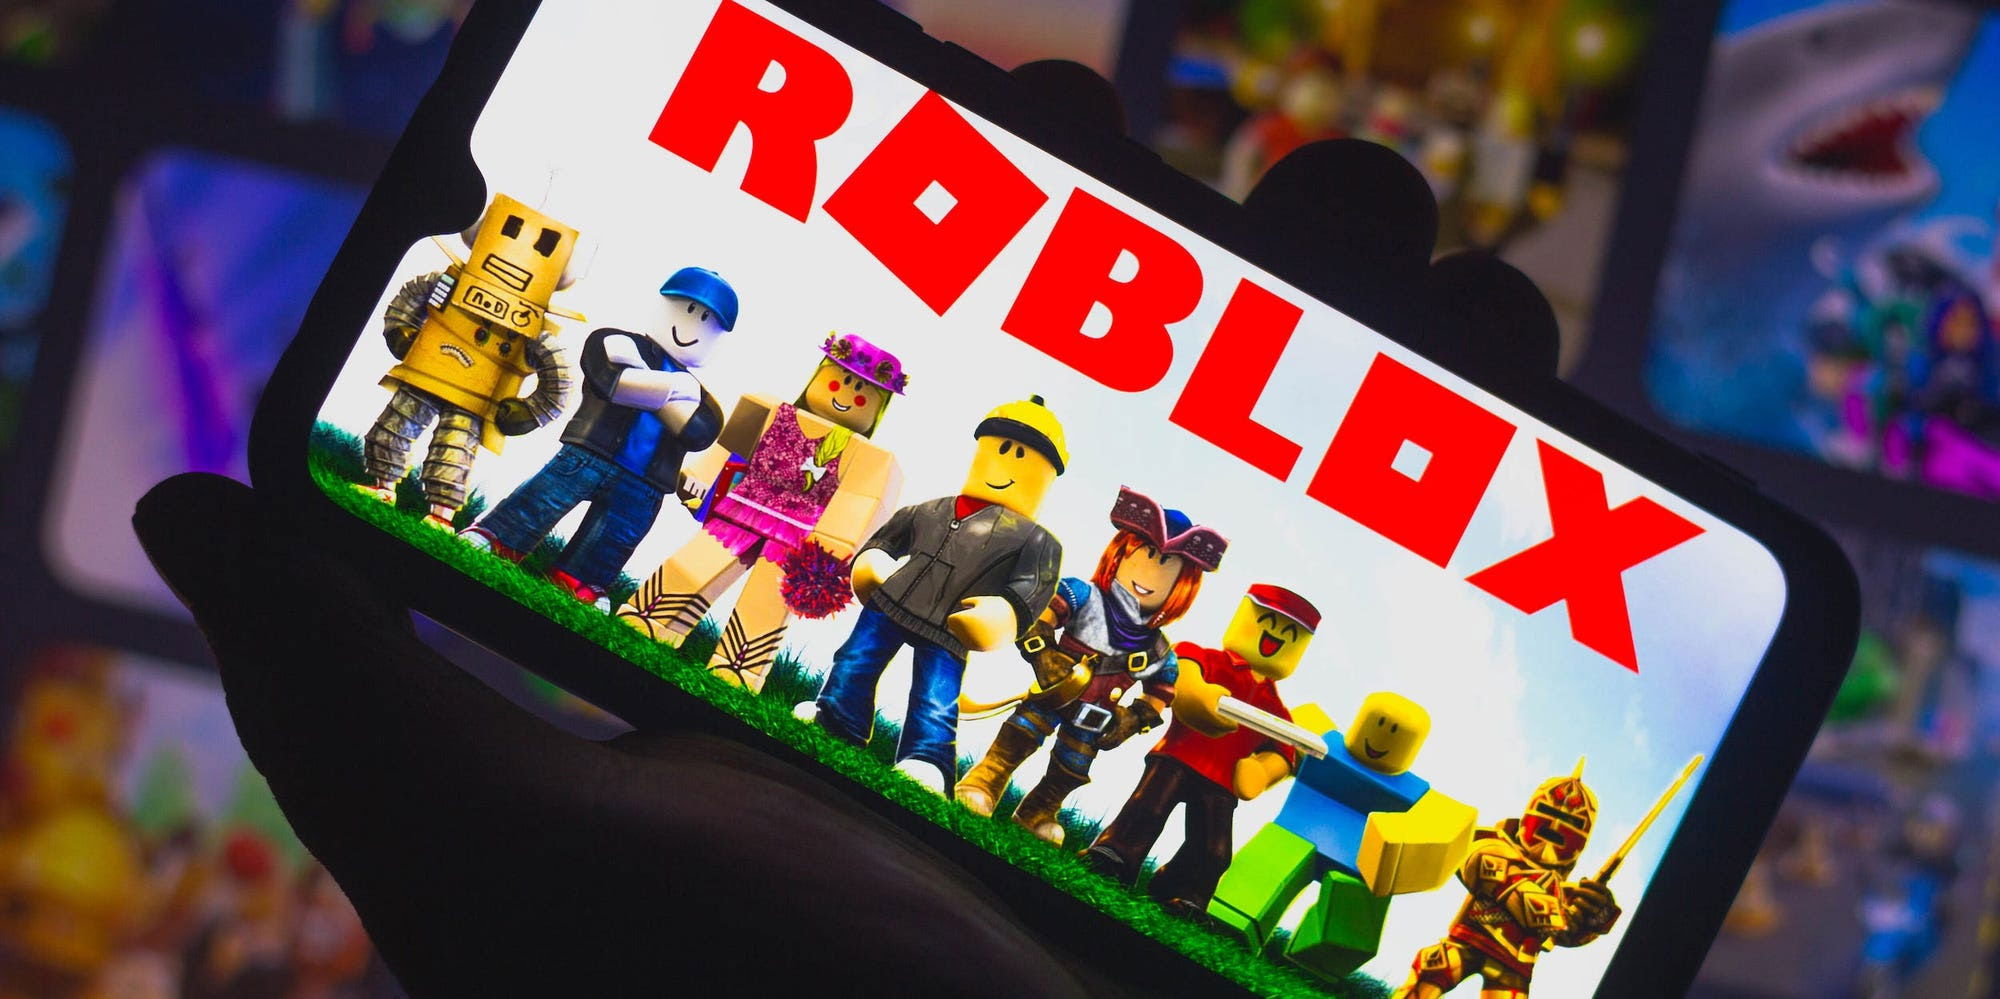 Roblox's market capitalization has increased by nearly $26 billion as a result of the metaverse.